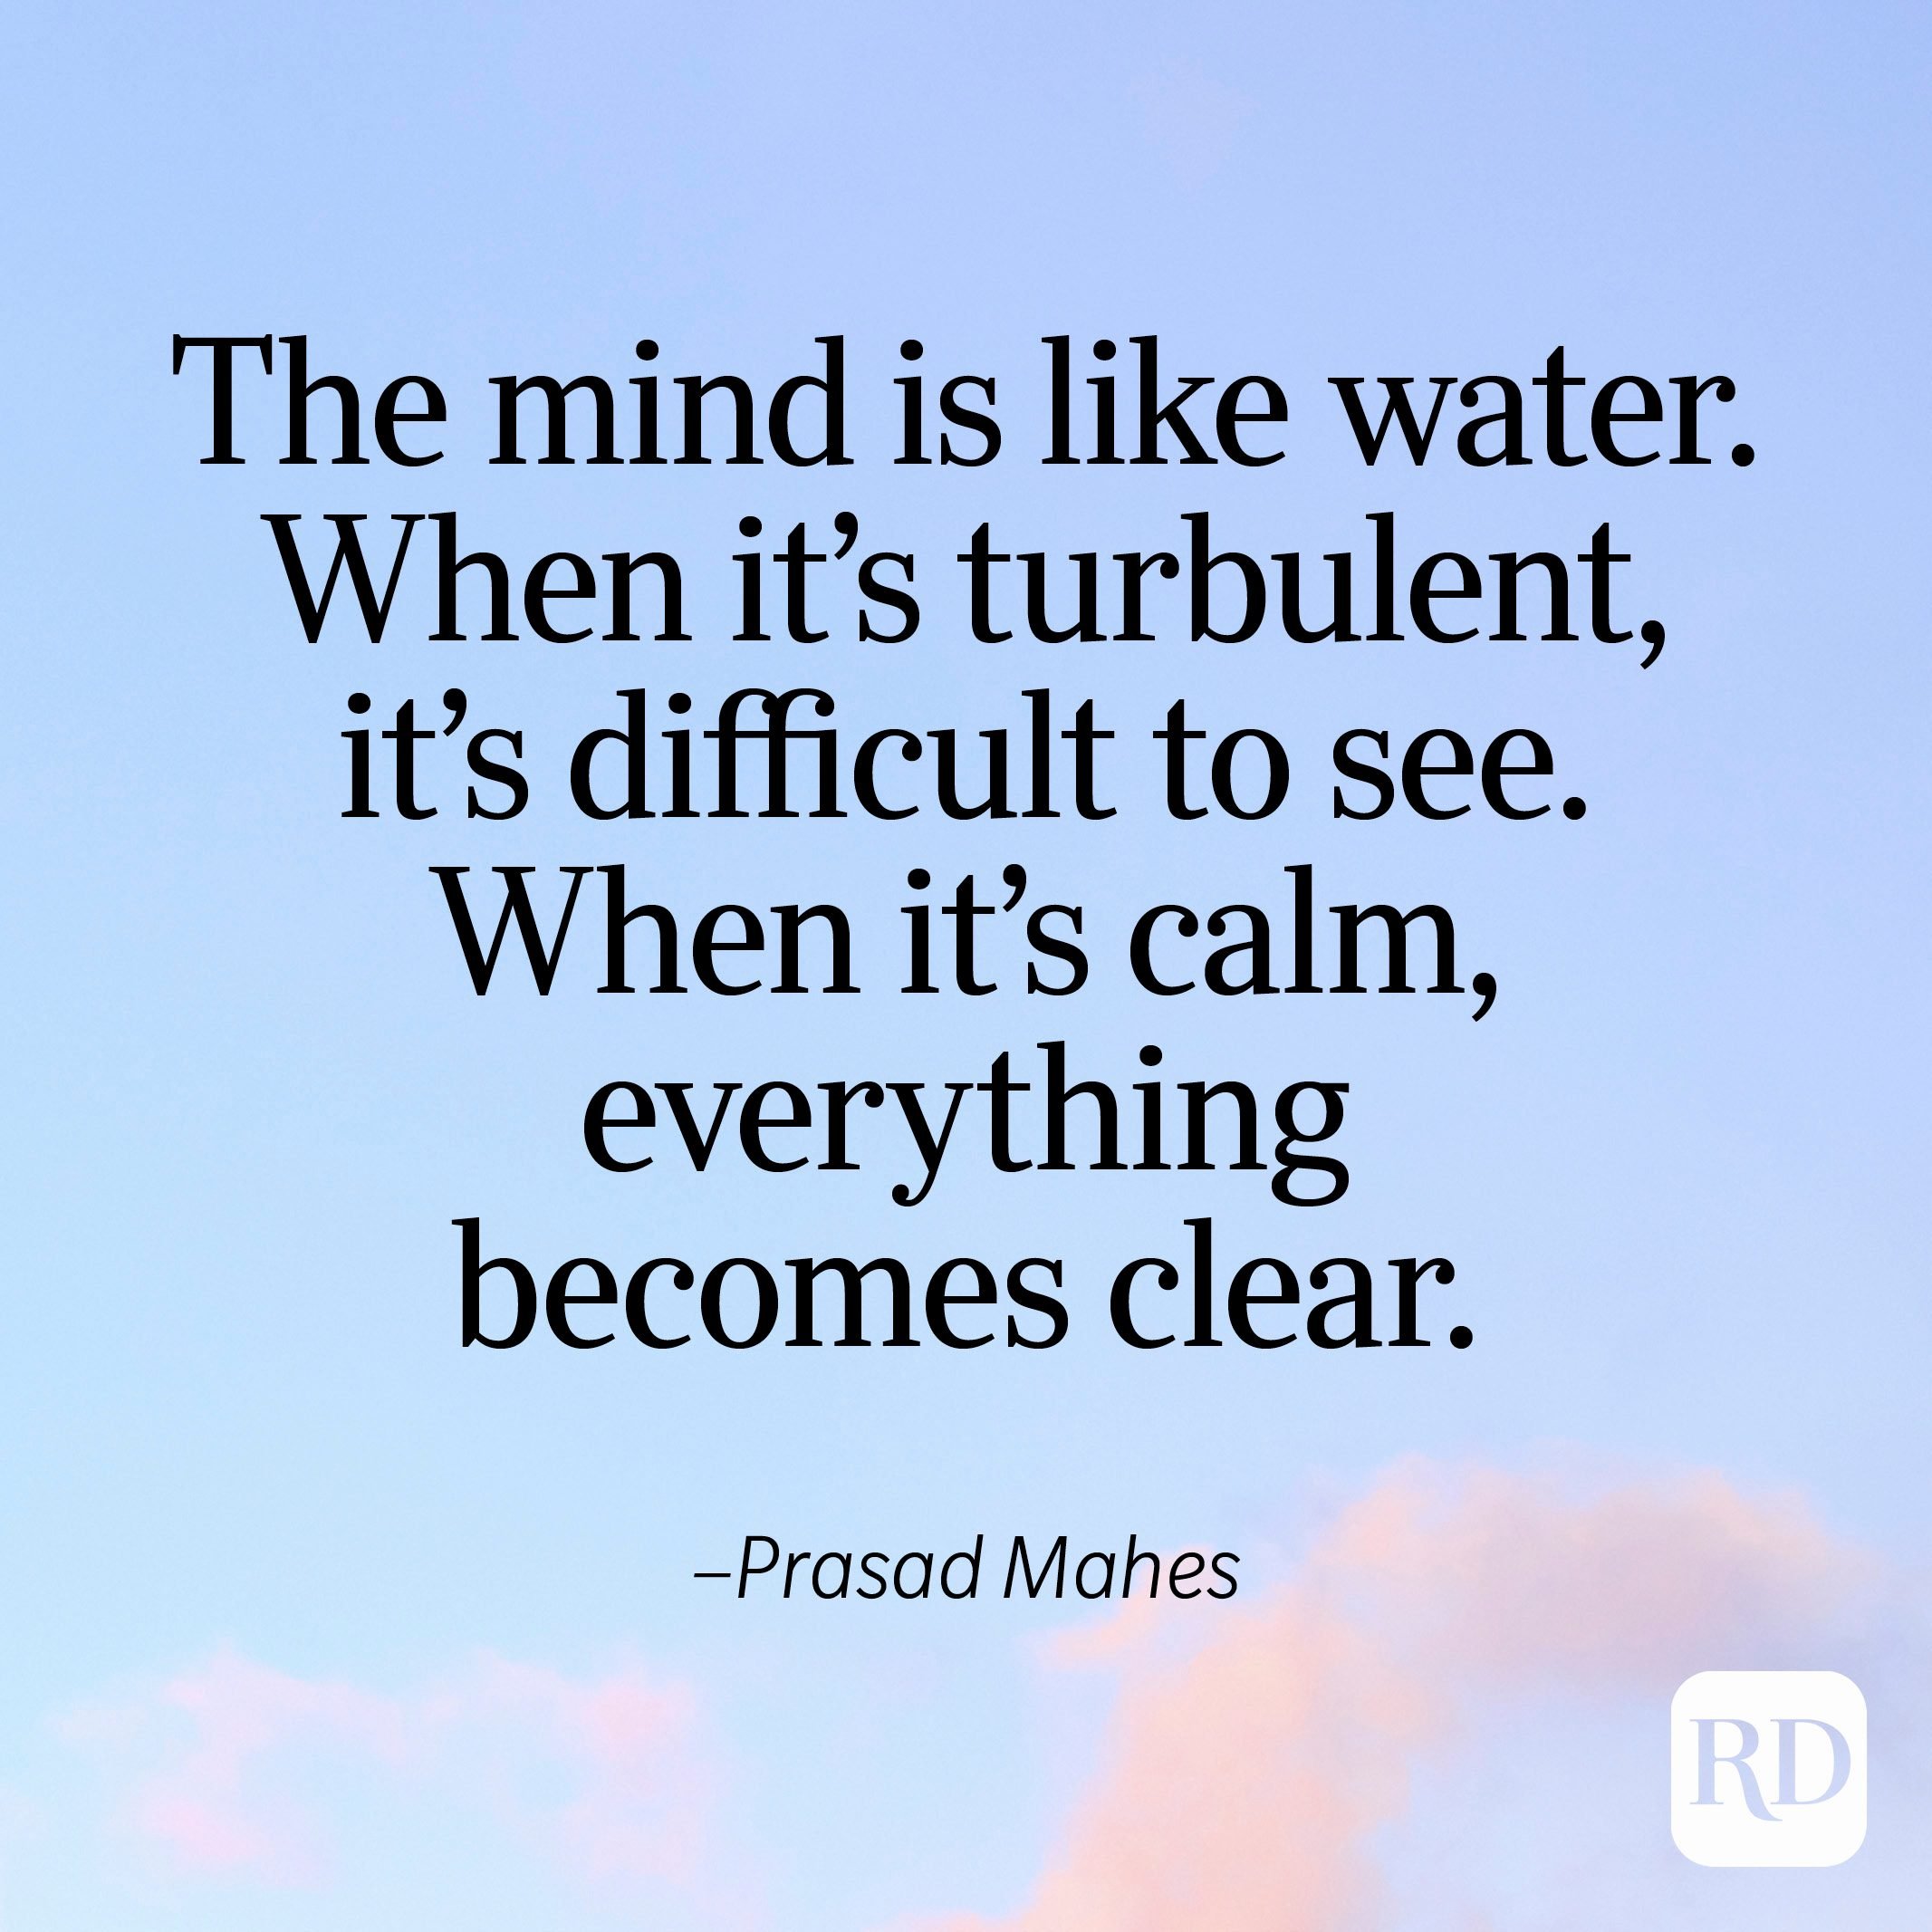 "The mind is like water. When it's turbulent, it's difficult to see. When it's calm, everything becomes clear." —Prasad Mahes